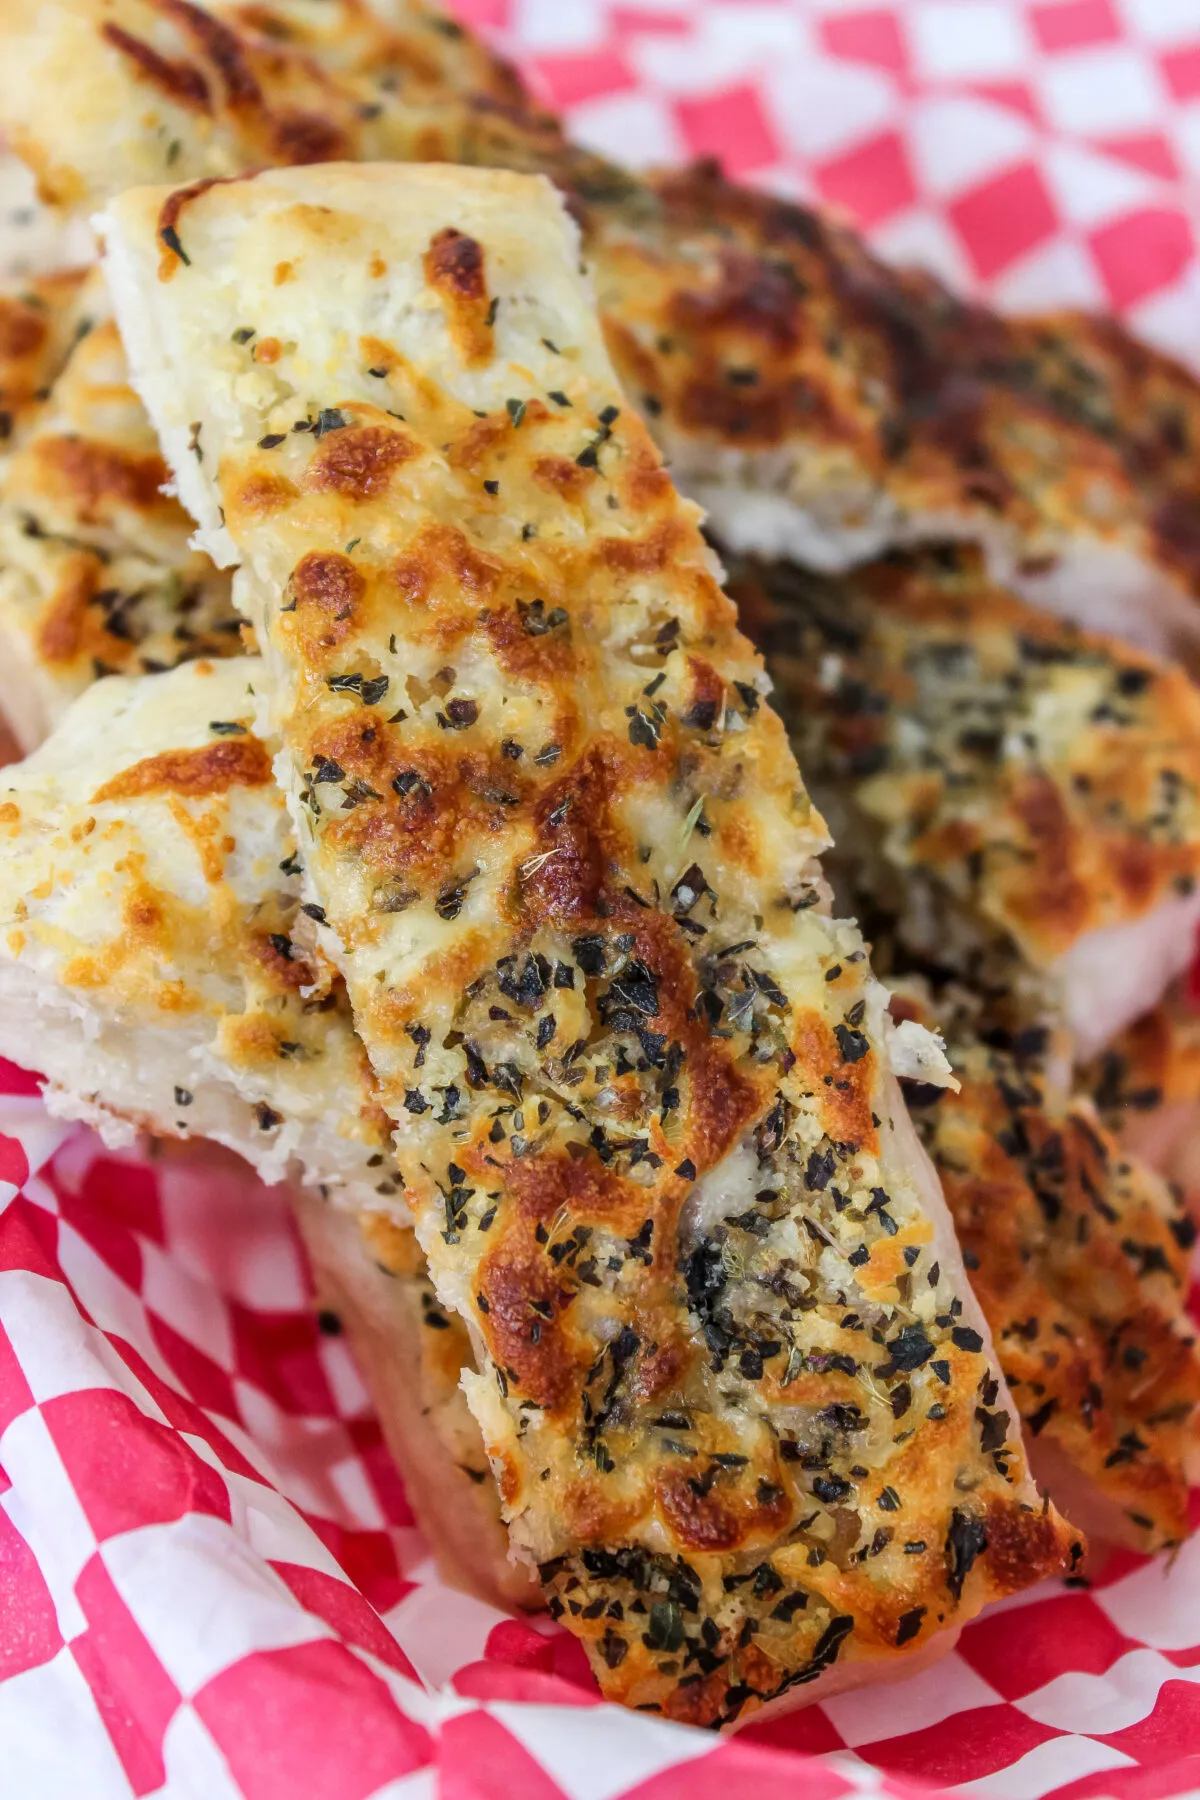 These cheesy garlic breadsticks are made from pizza dough for a delicious twist on the classic! It's a hit as a side dish or appetizer.